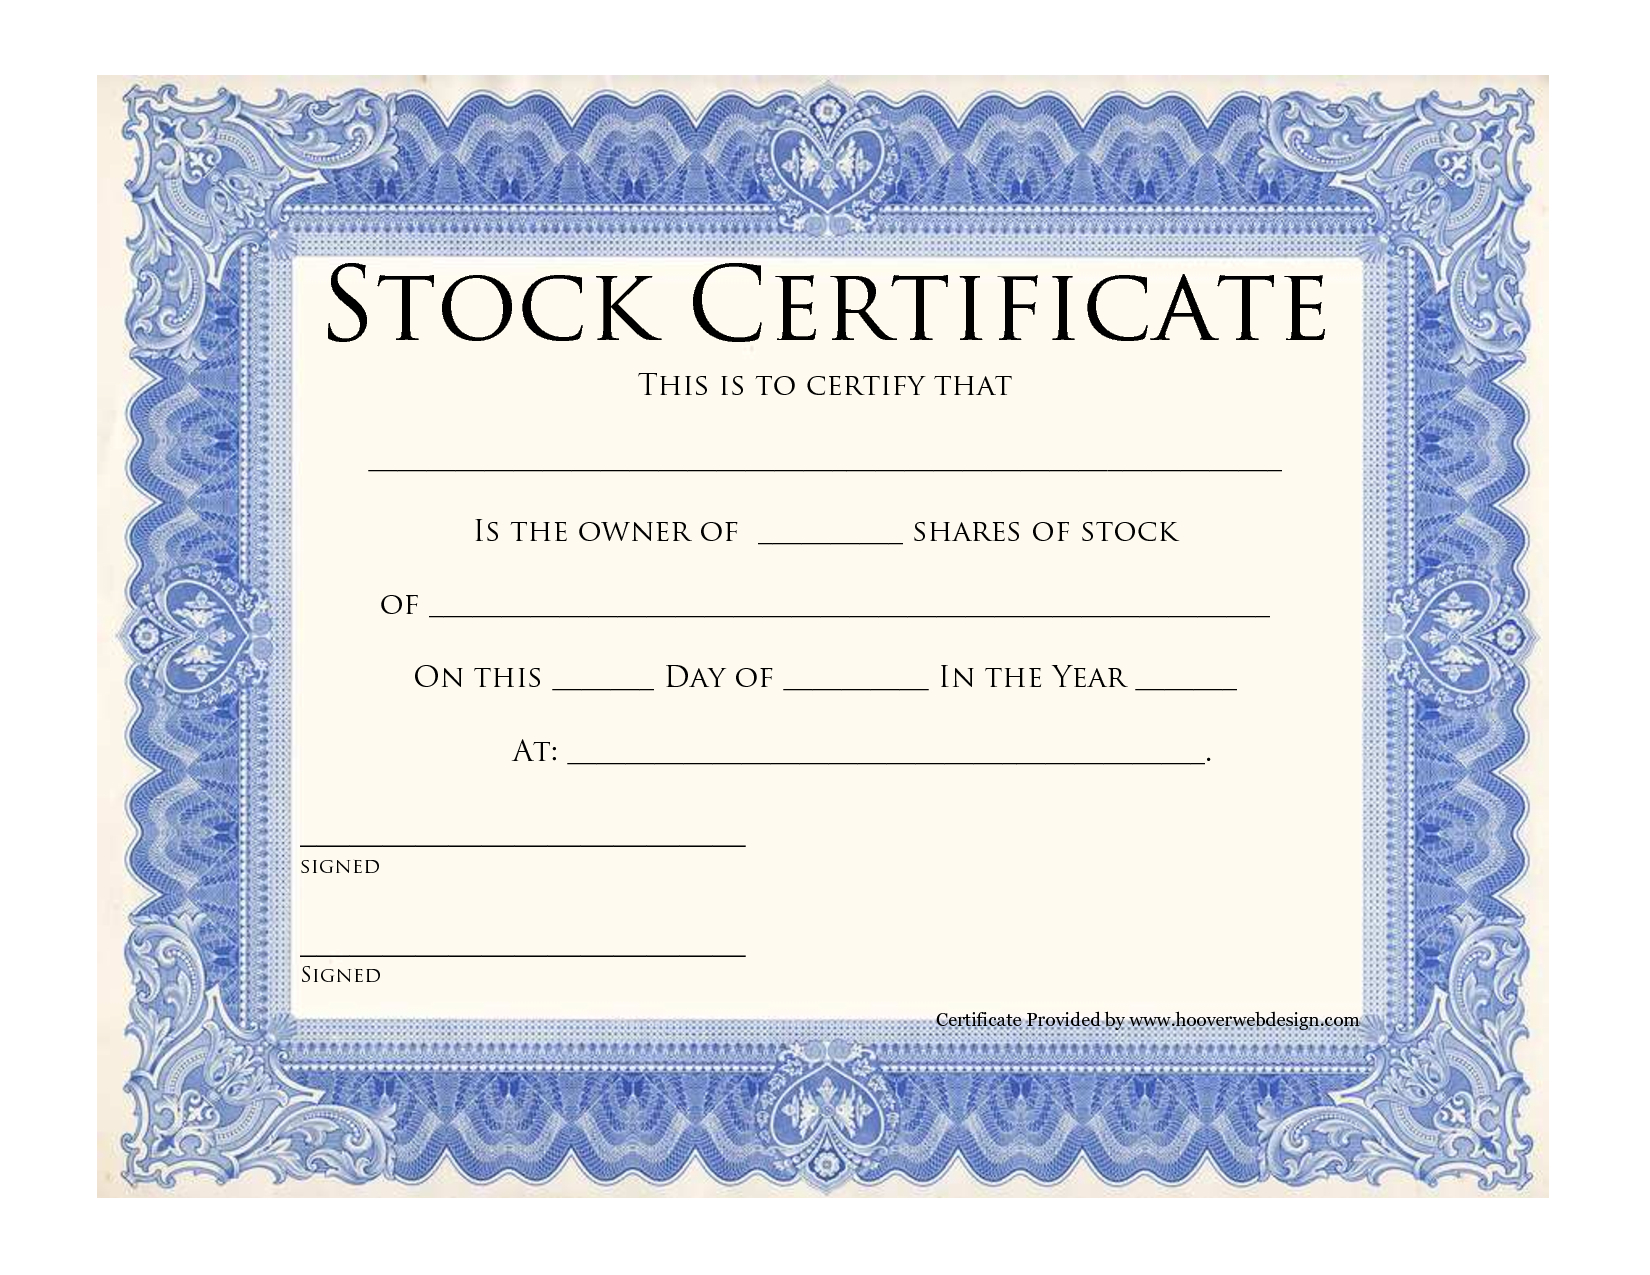 Blank Stock Certificate Template  Printable Stock Certificates regarding Blank Share Certificate Template Free